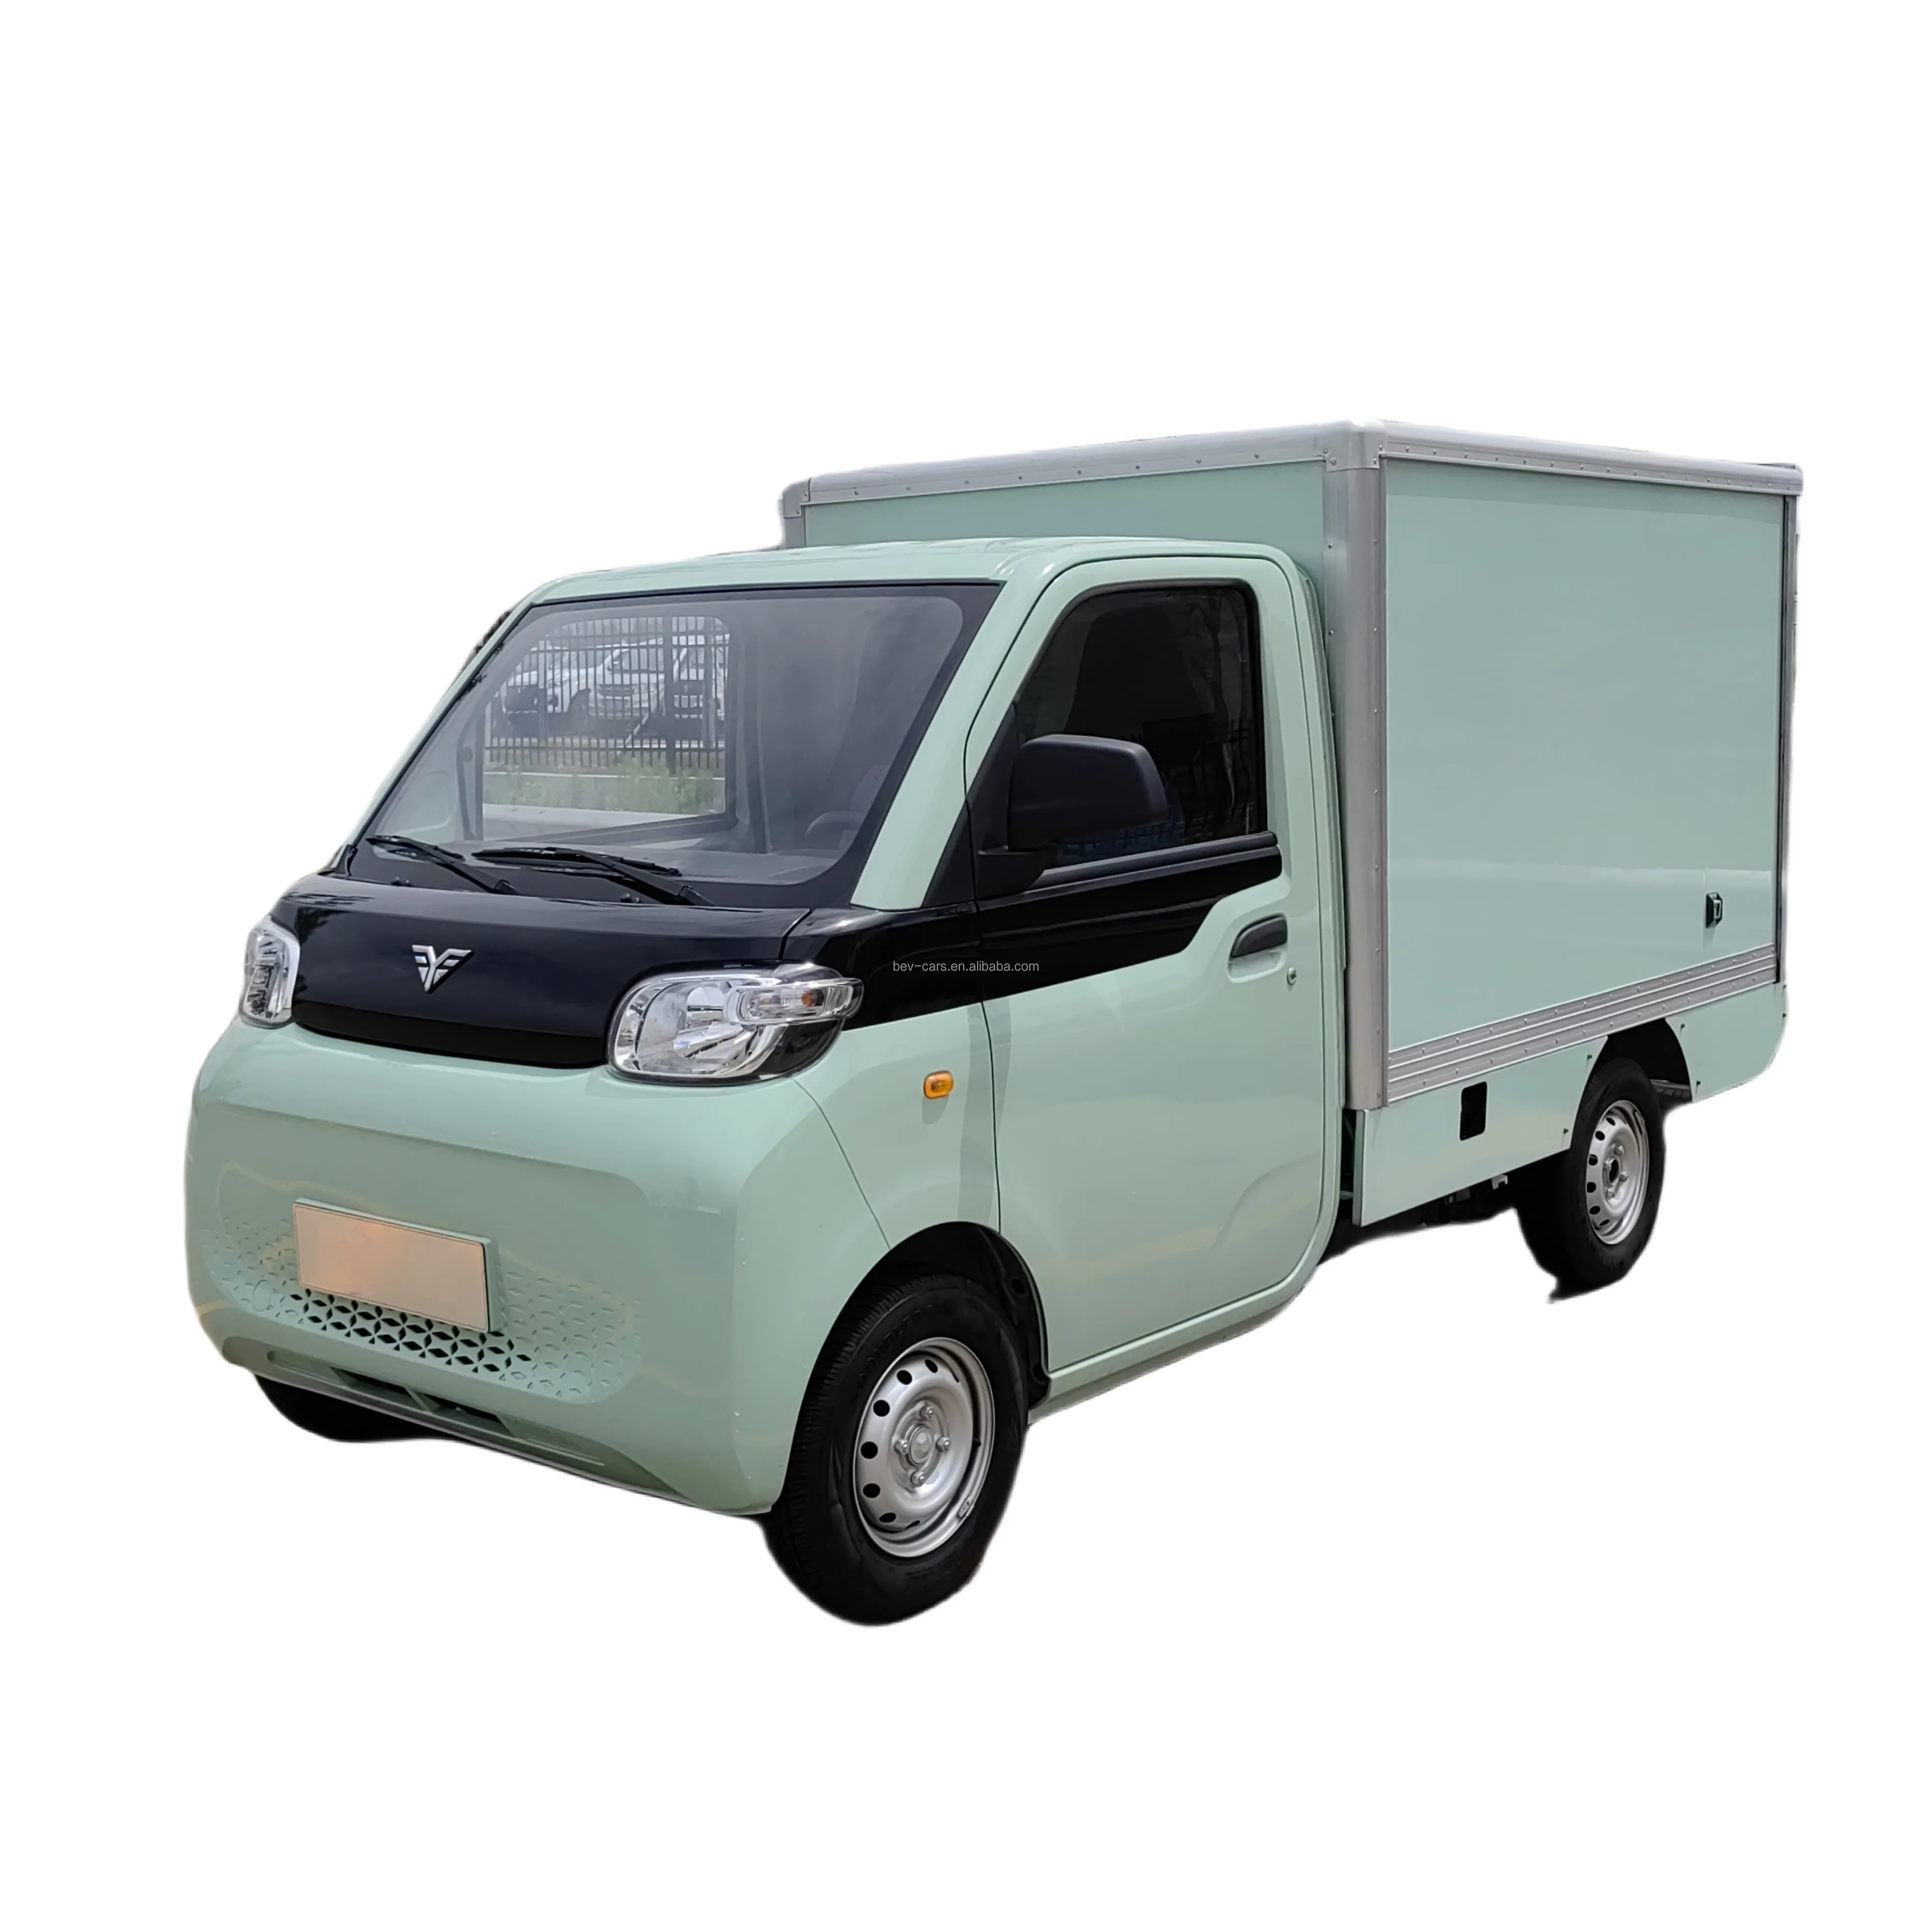 The Chinese plant produces low-cost EEC certified low-speed four-wheel trucks and enclosed adult electric vans